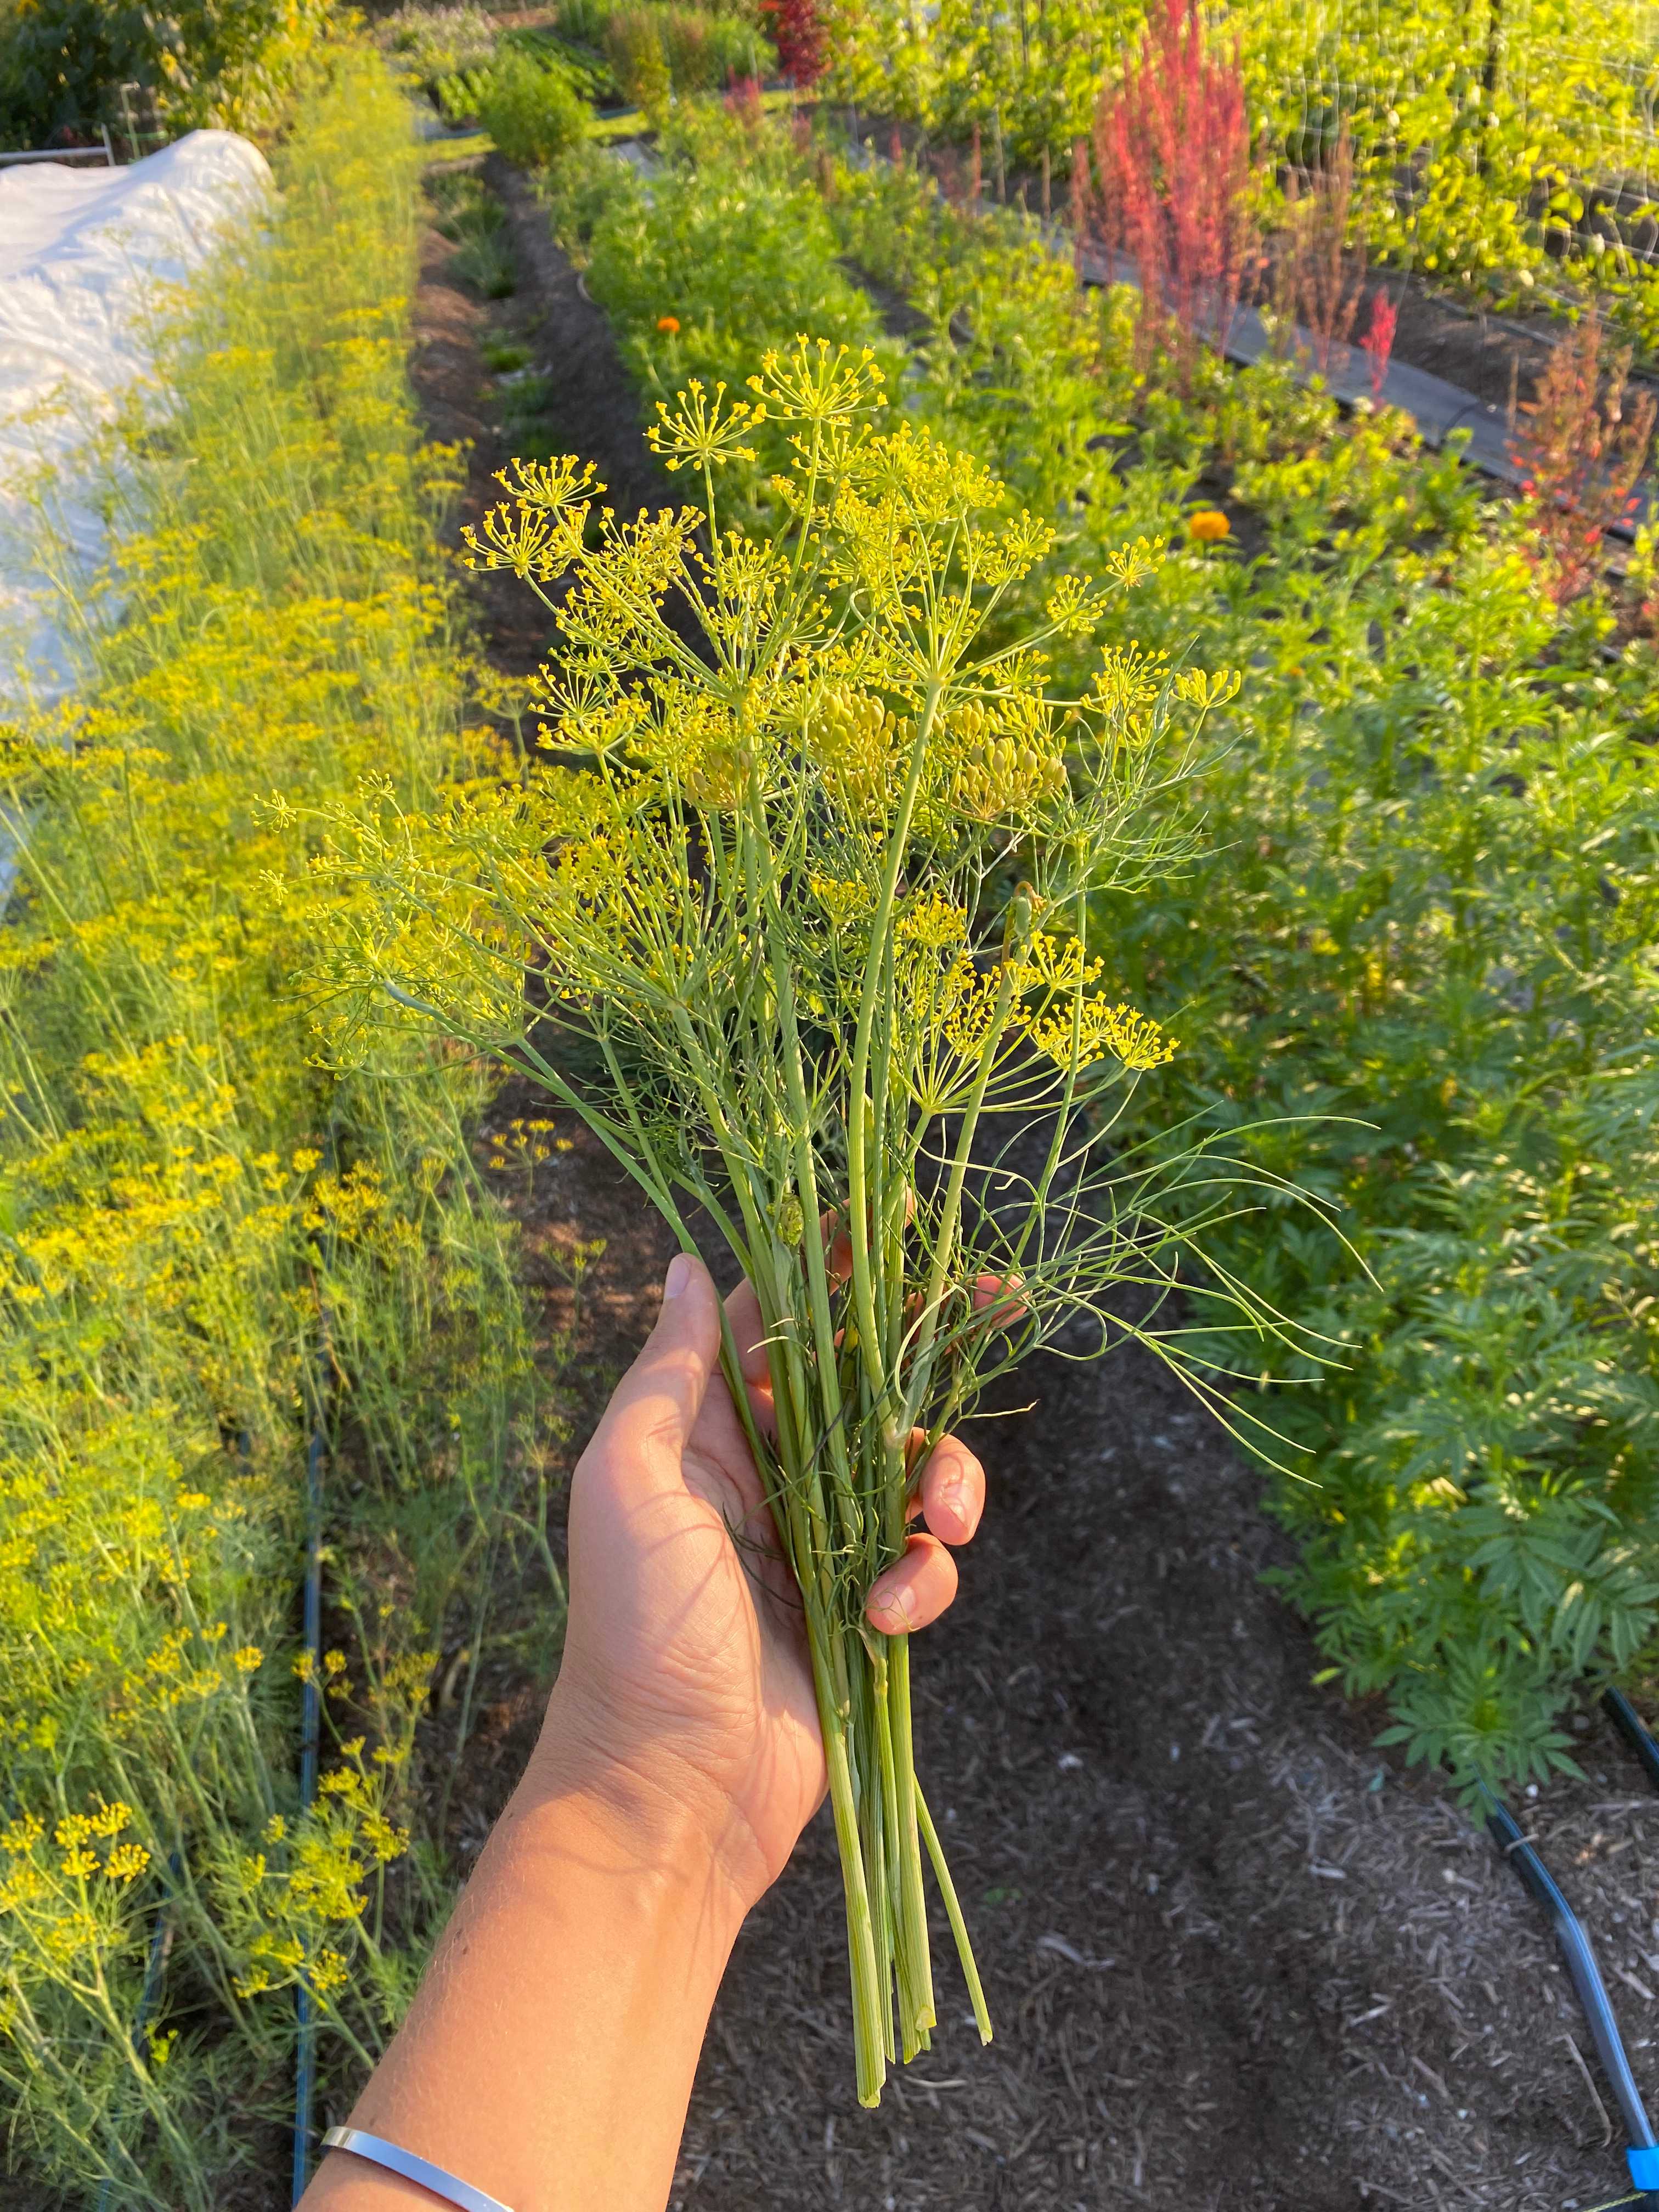 A picture of Dill - Flower